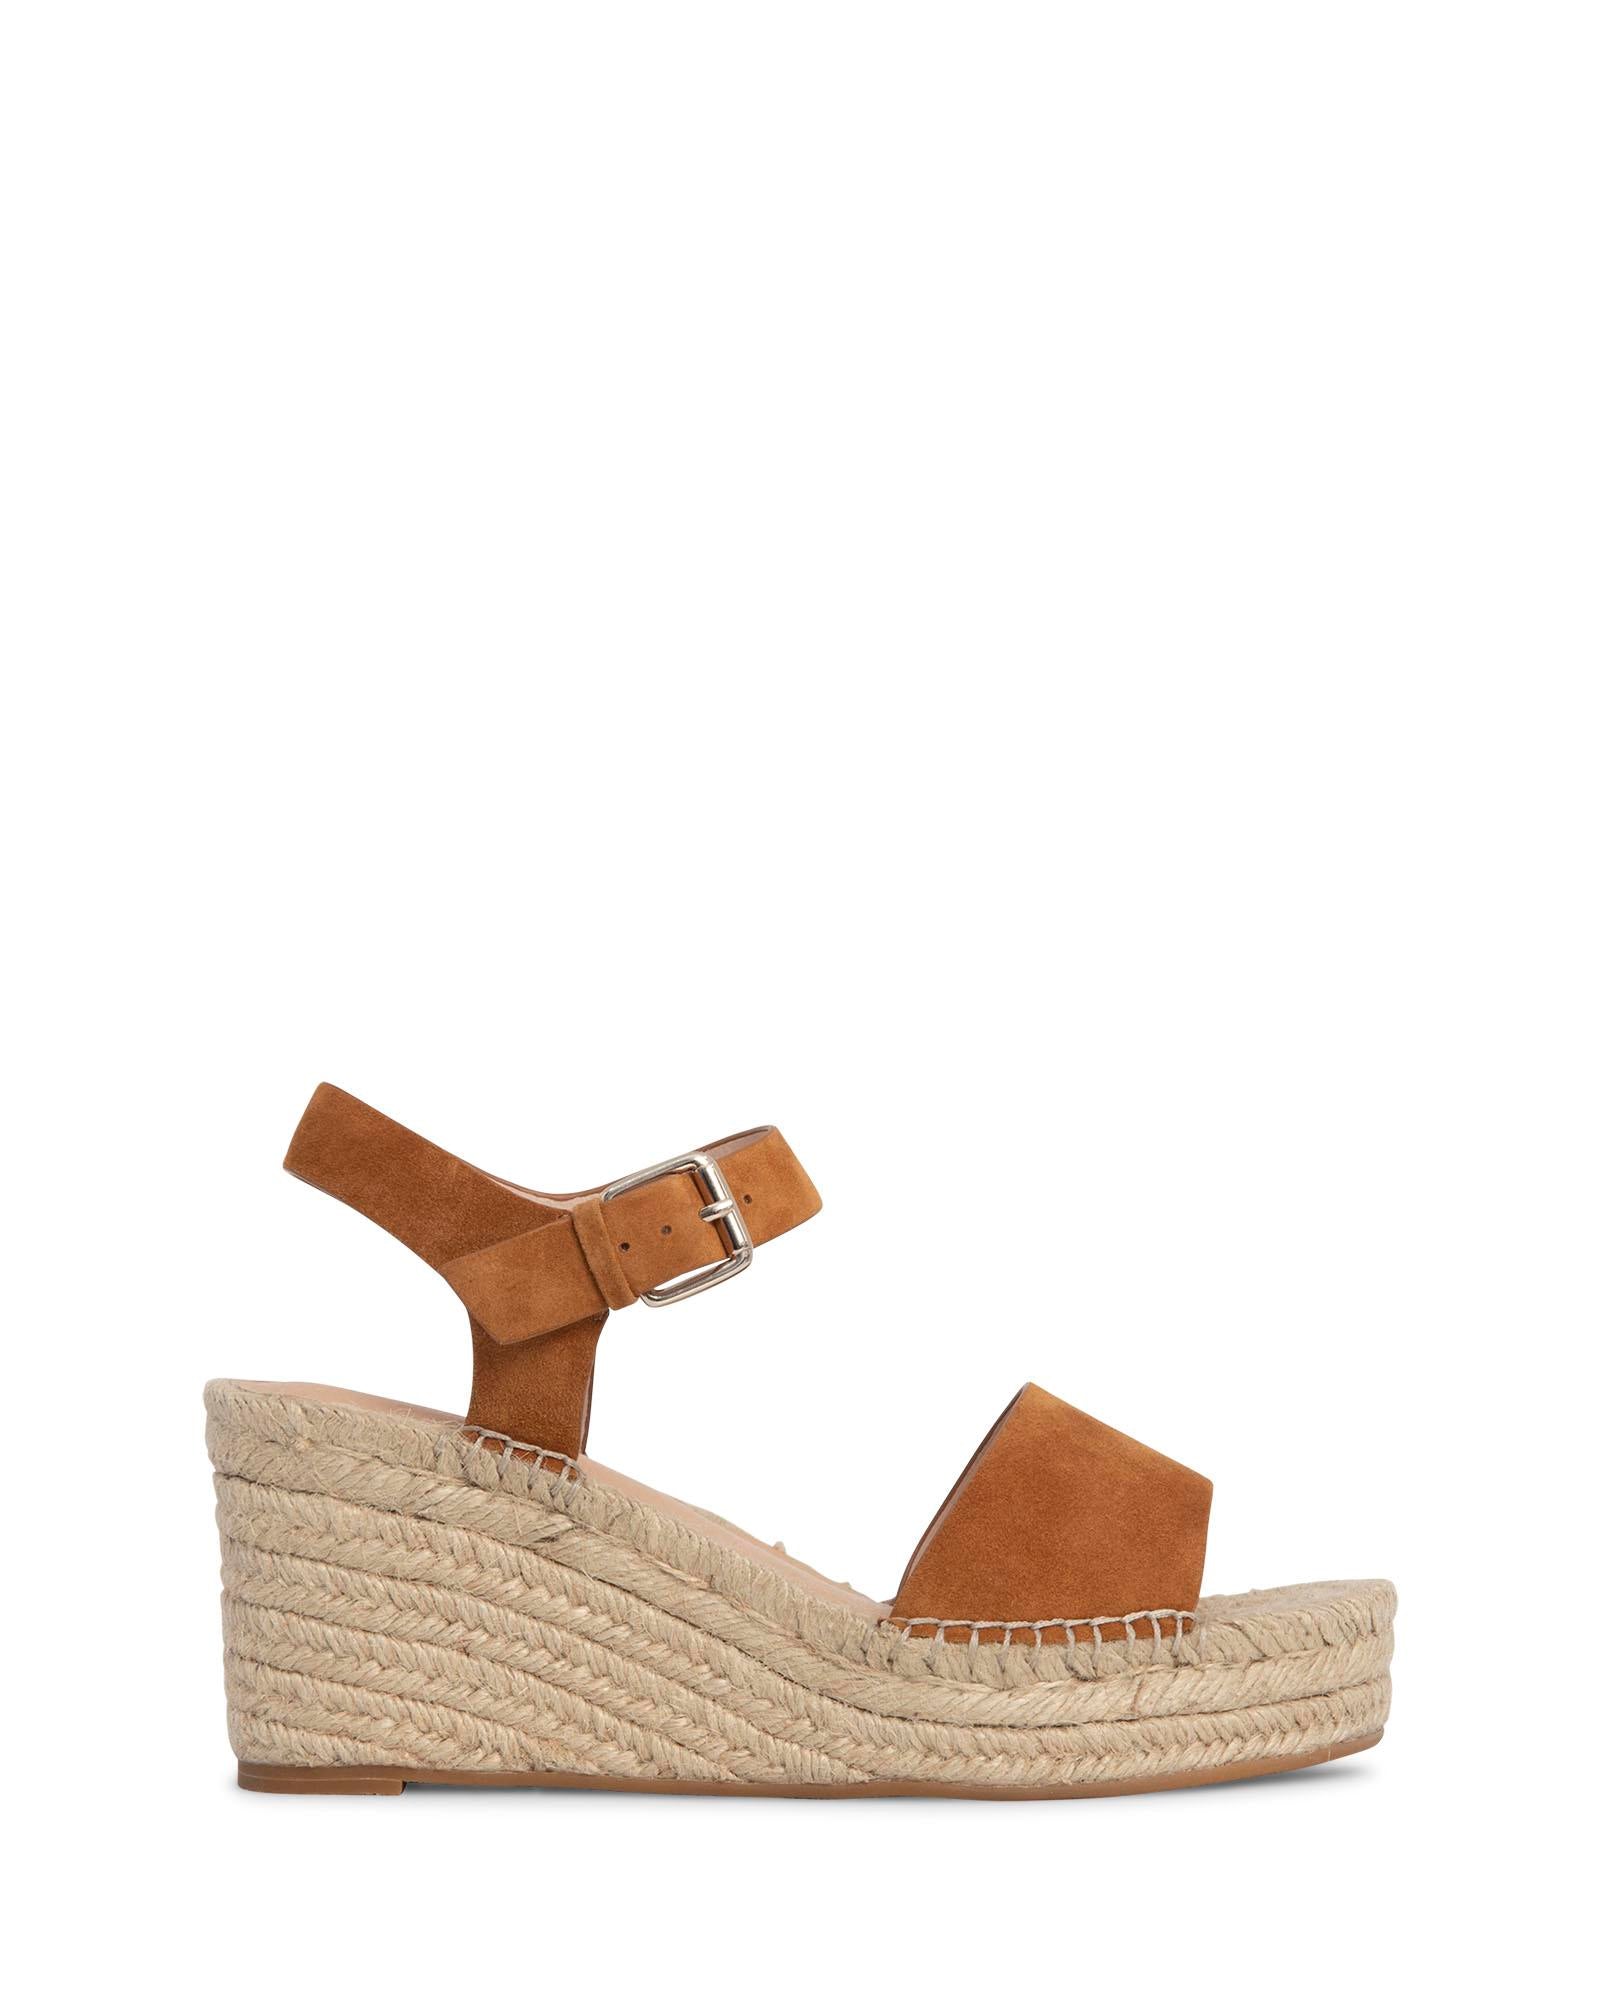 Ophelia Tan Suede 8cm Woven Wedge with Adjustable Ankle Strap 